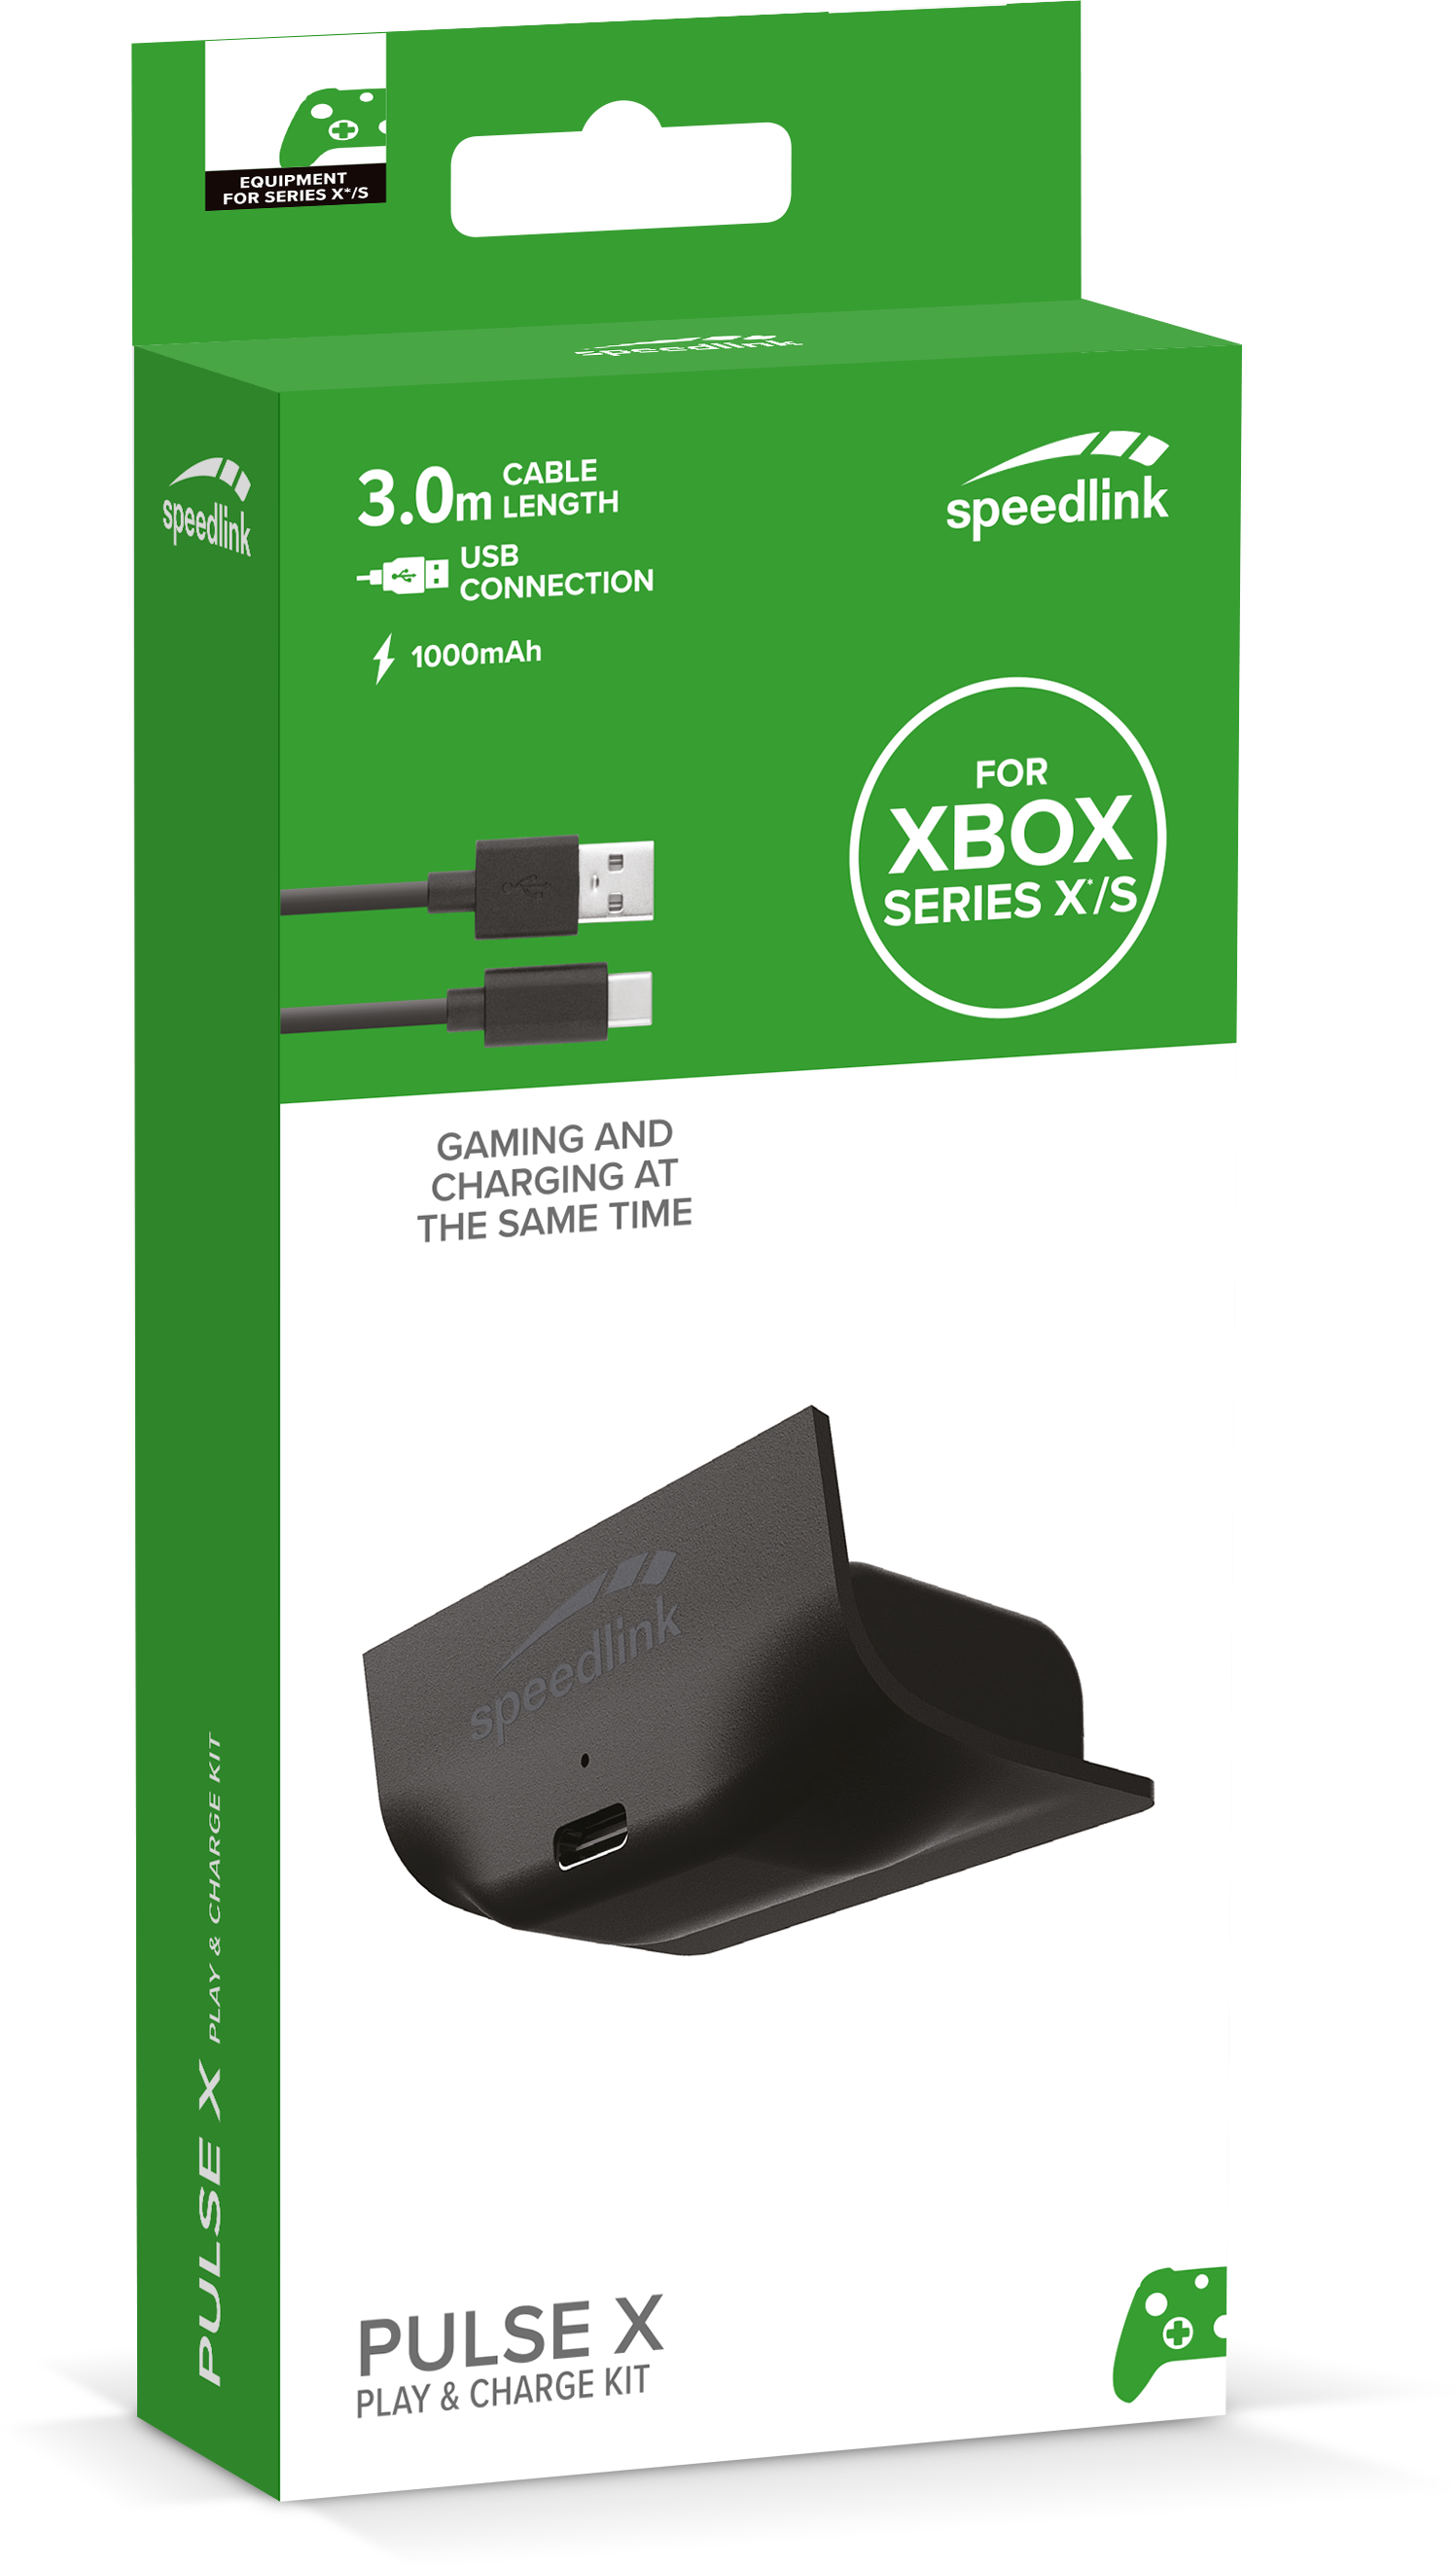 Psychologisch Dekking browser PULSE X Play & Charge Kit for XBox Series X/S, black | SL-260000-BK